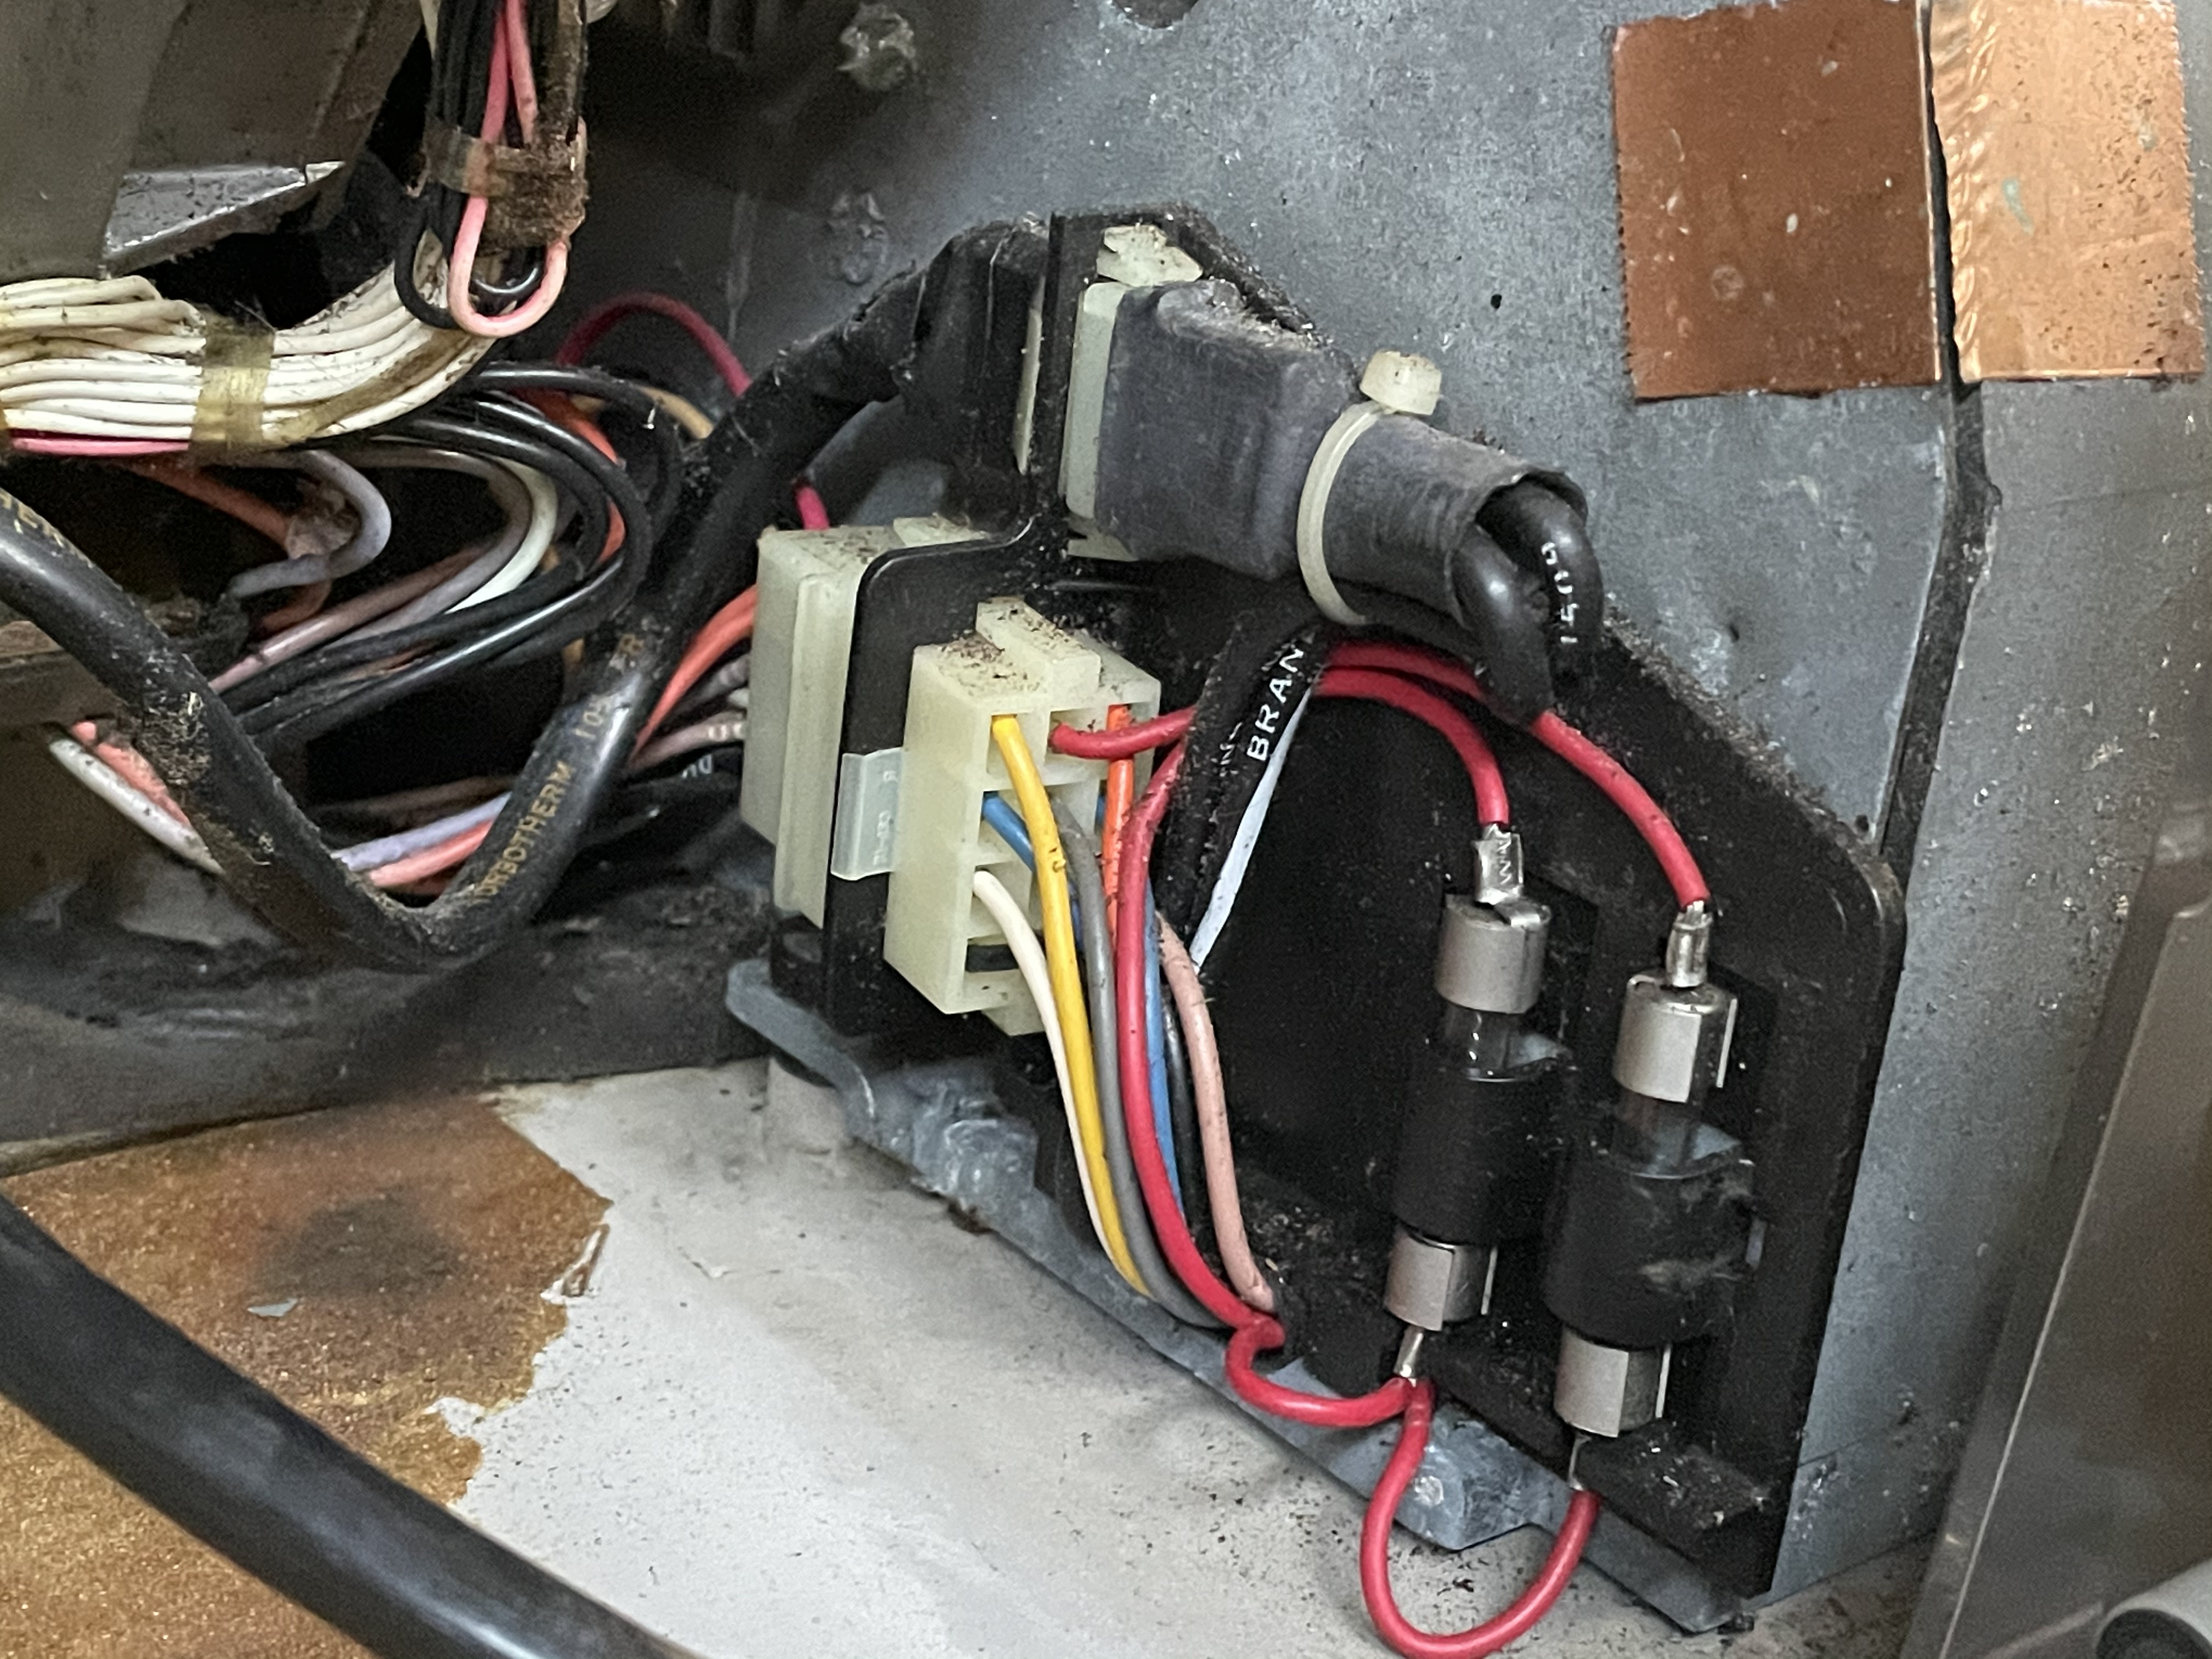 AC and DC connectors and fuses